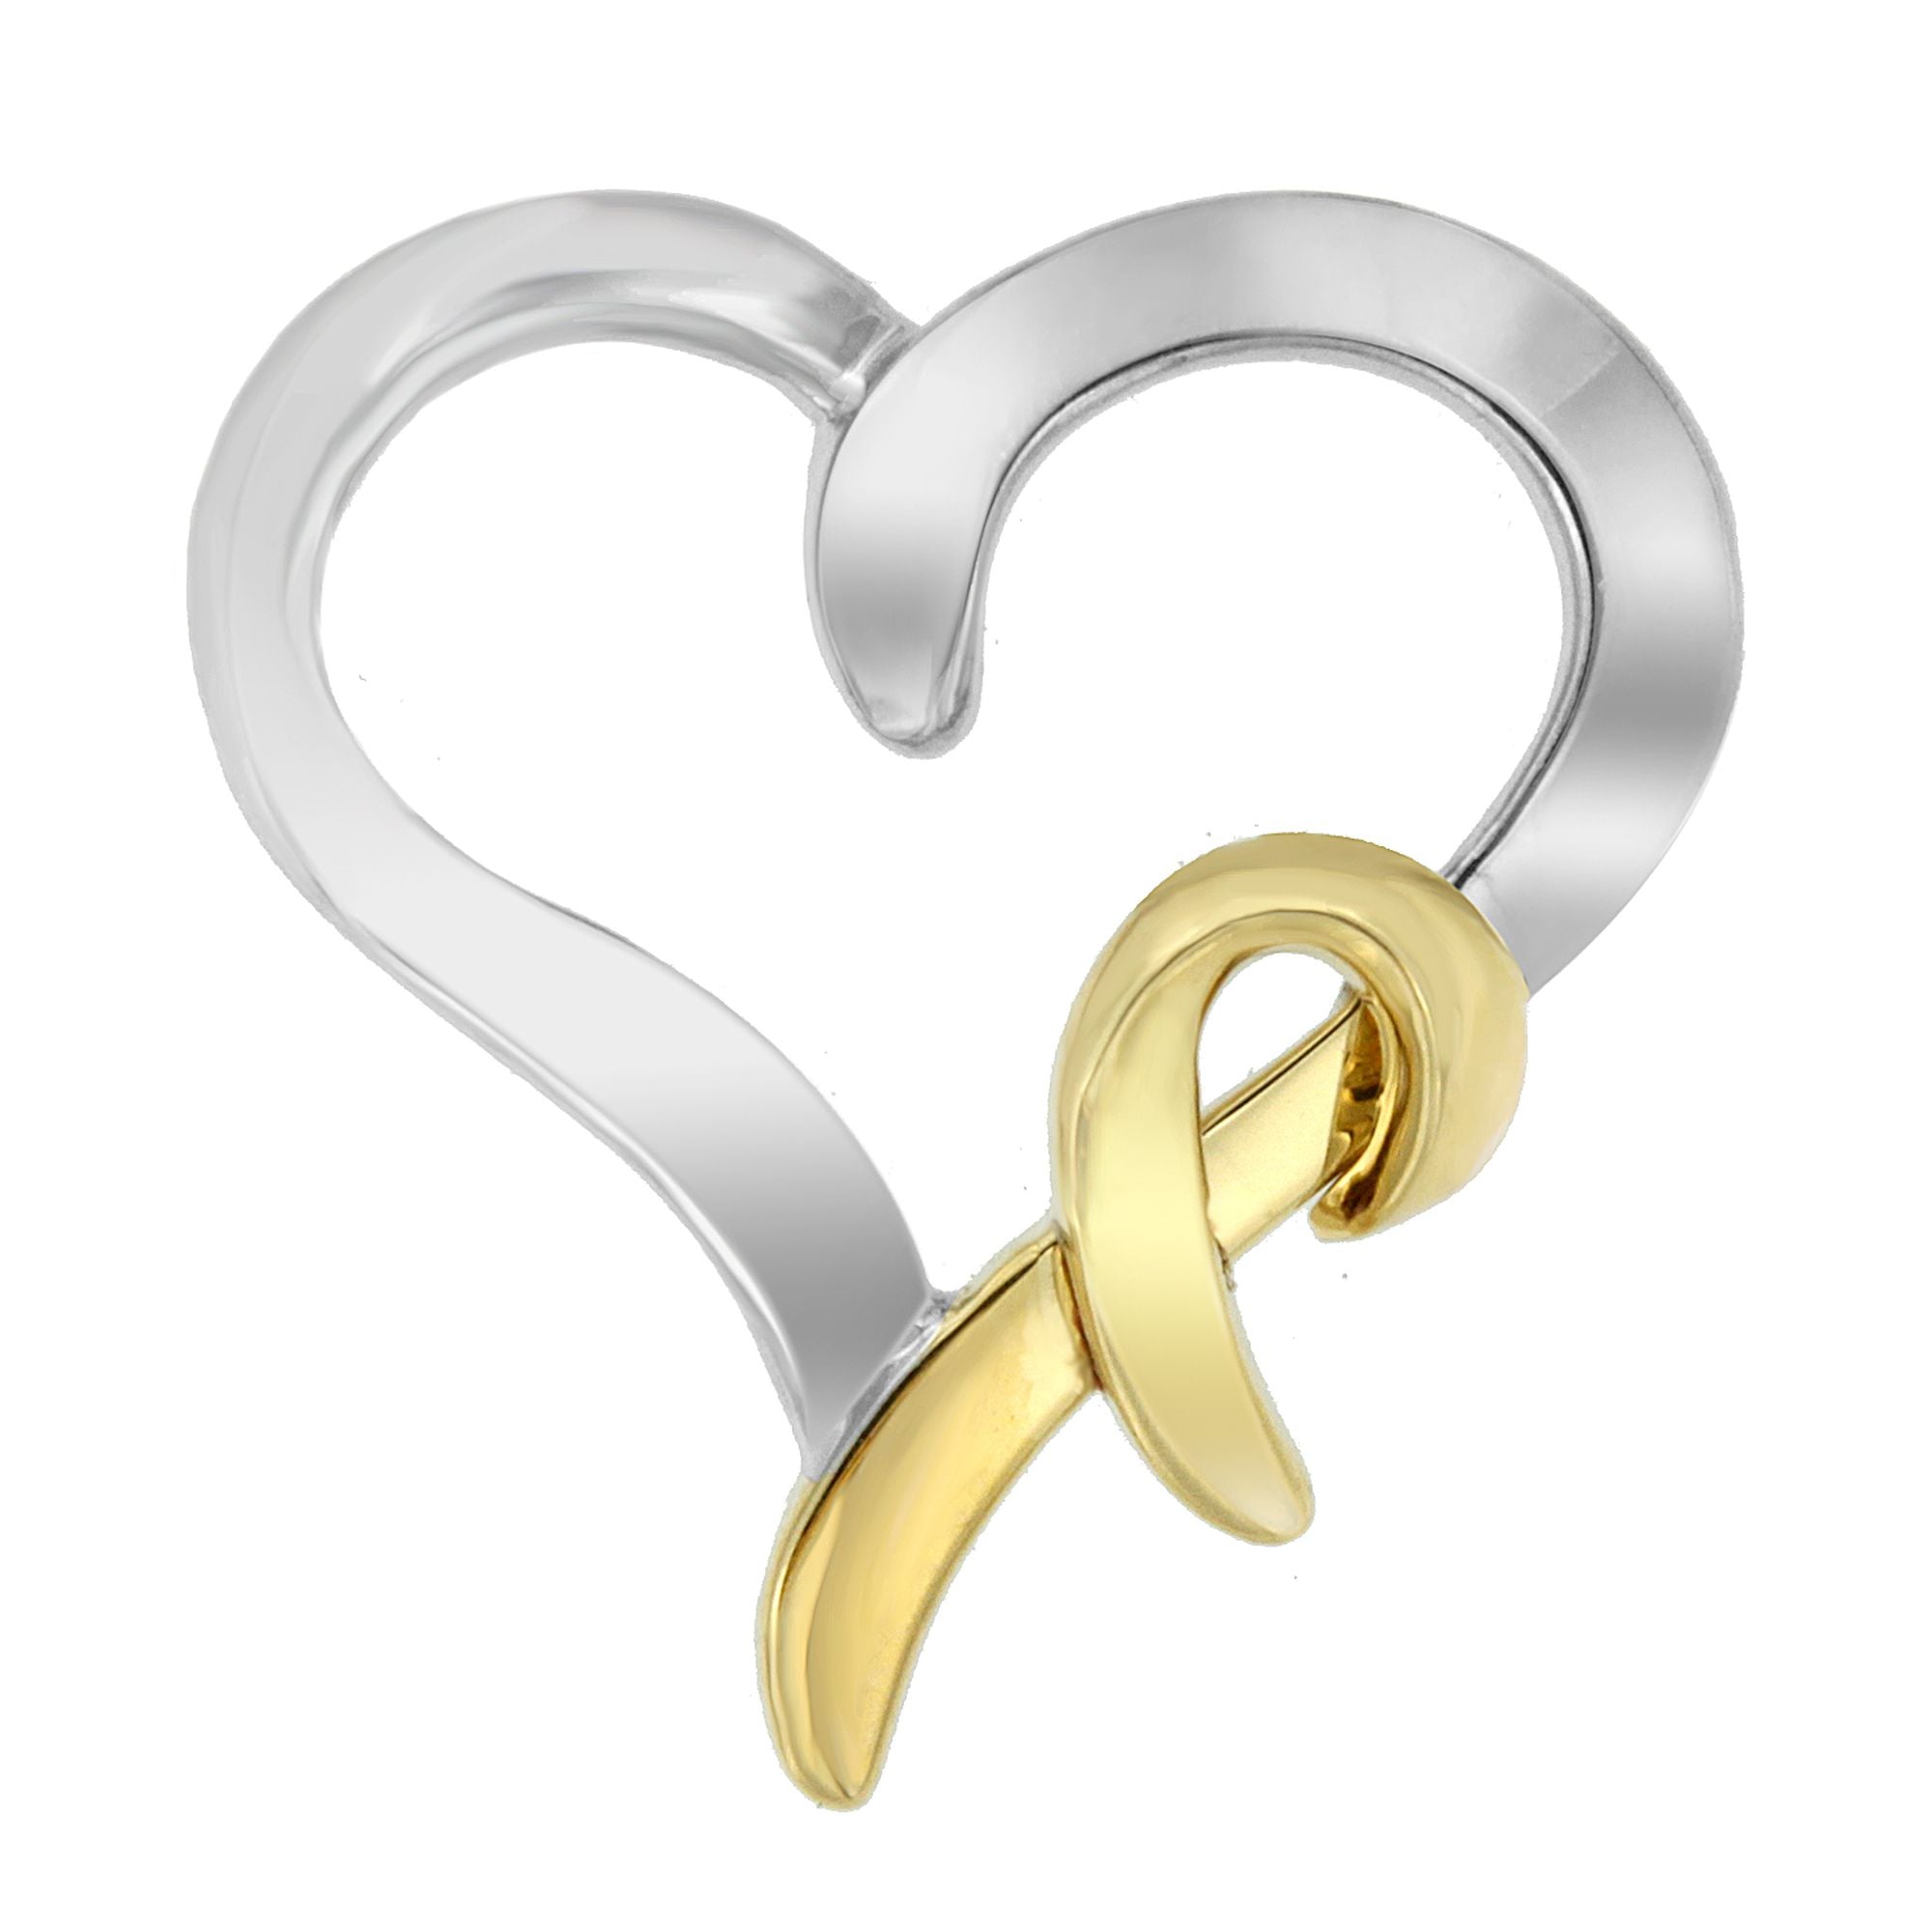 .925-Sterling-Silver-And-14K-Yellow-Gold-Two-Tone-Heart-Shaped-Pendant-Necklace-Pendants-&-Charms